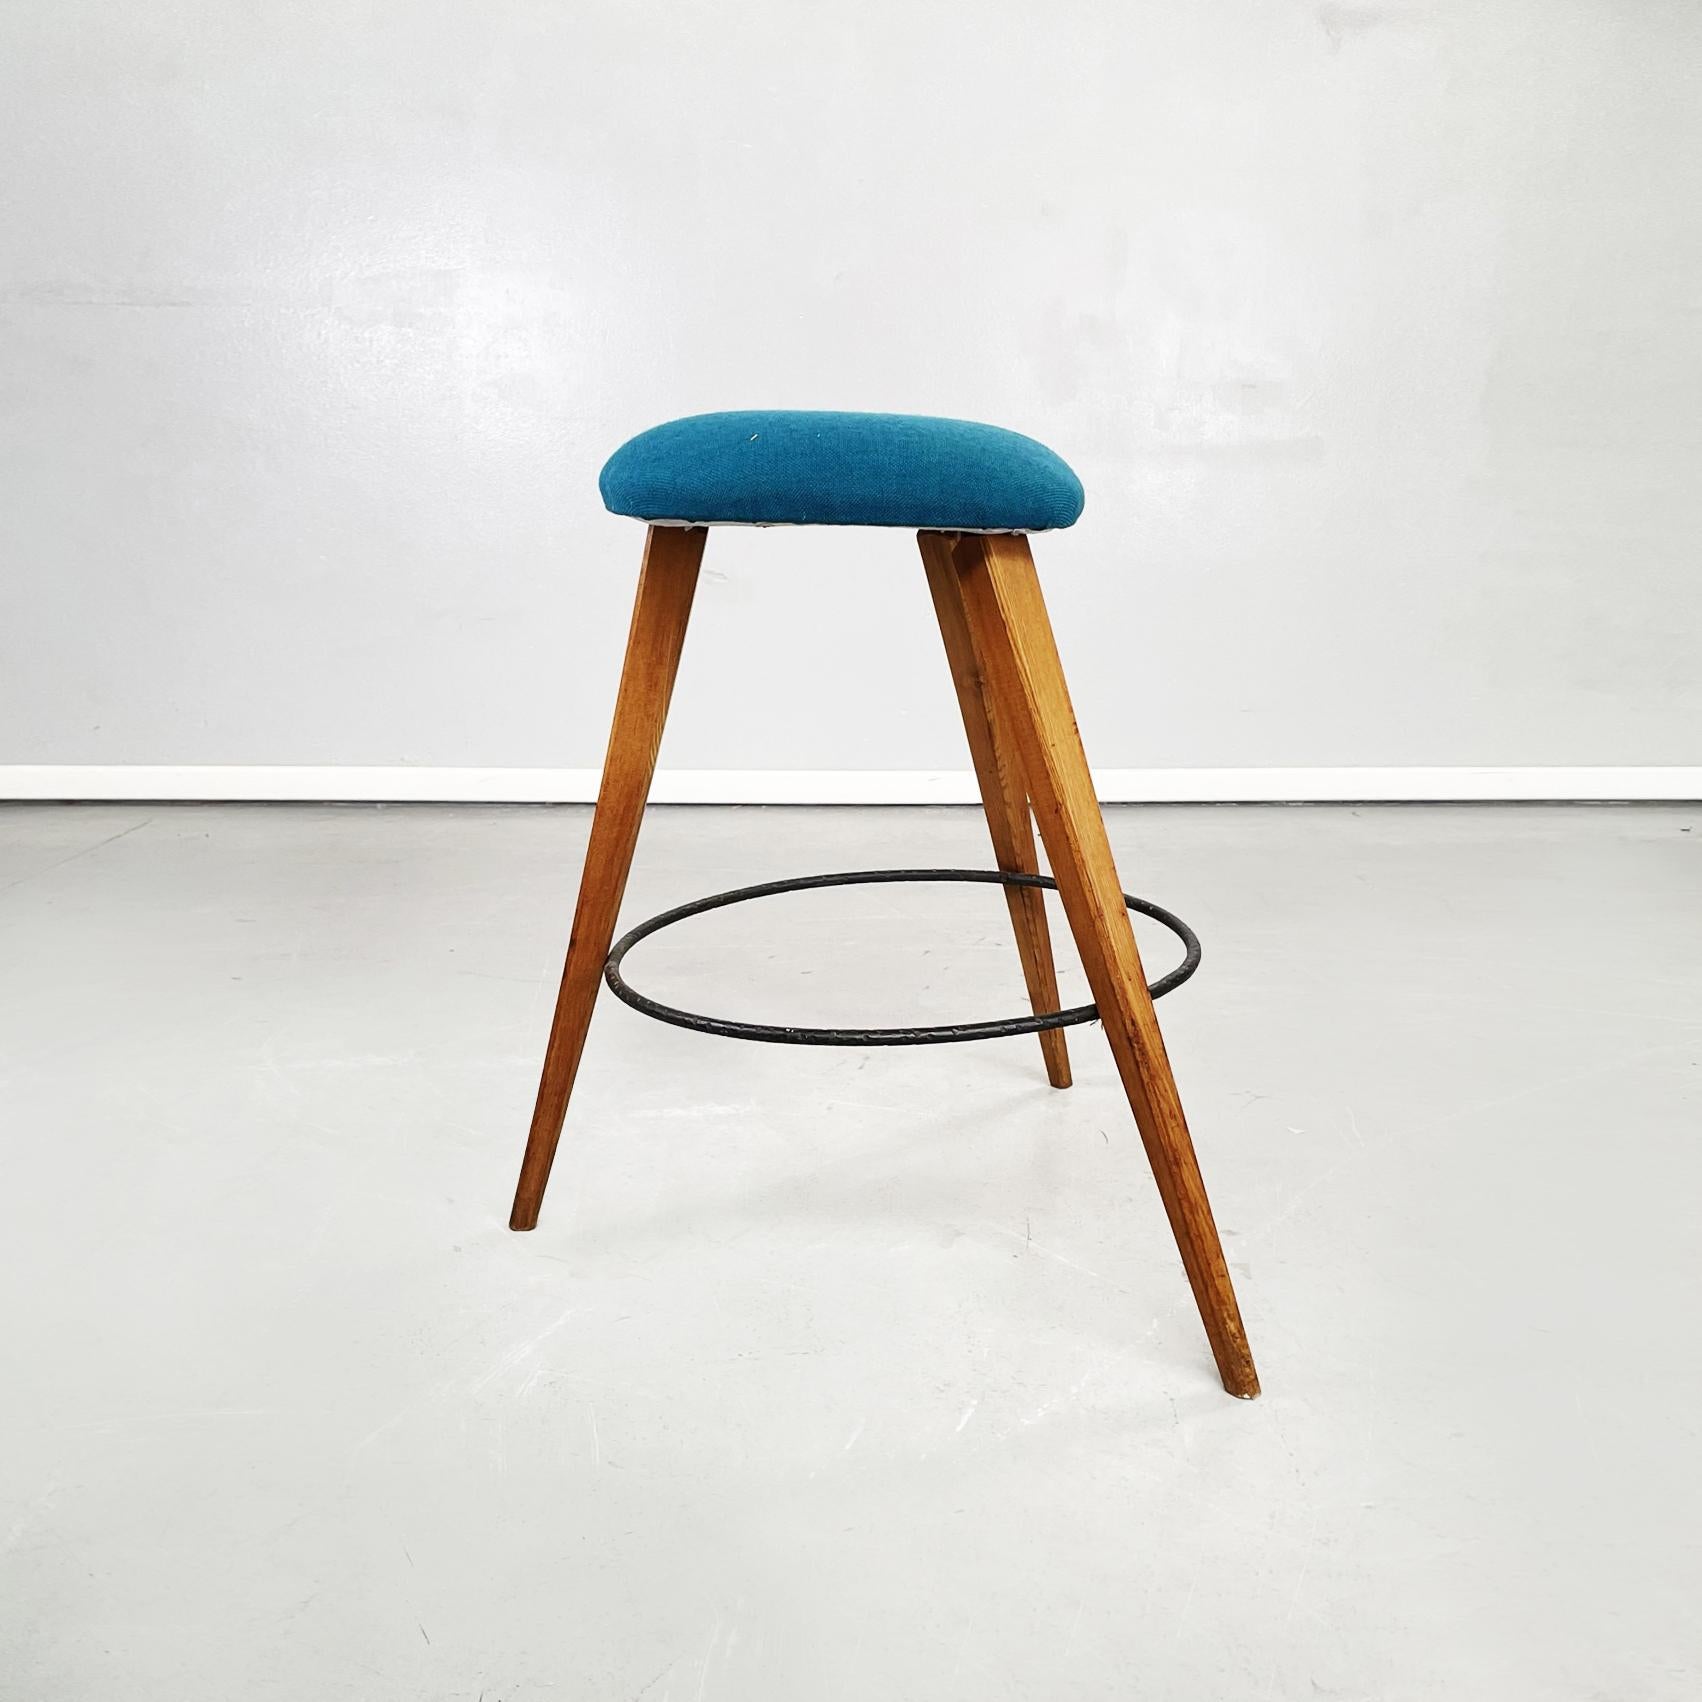 Italian Mid-Century Modern Stools in Wood, Black Iron and Blue Fabric, 1960s In Good Condition For Sale In MIlano, IT